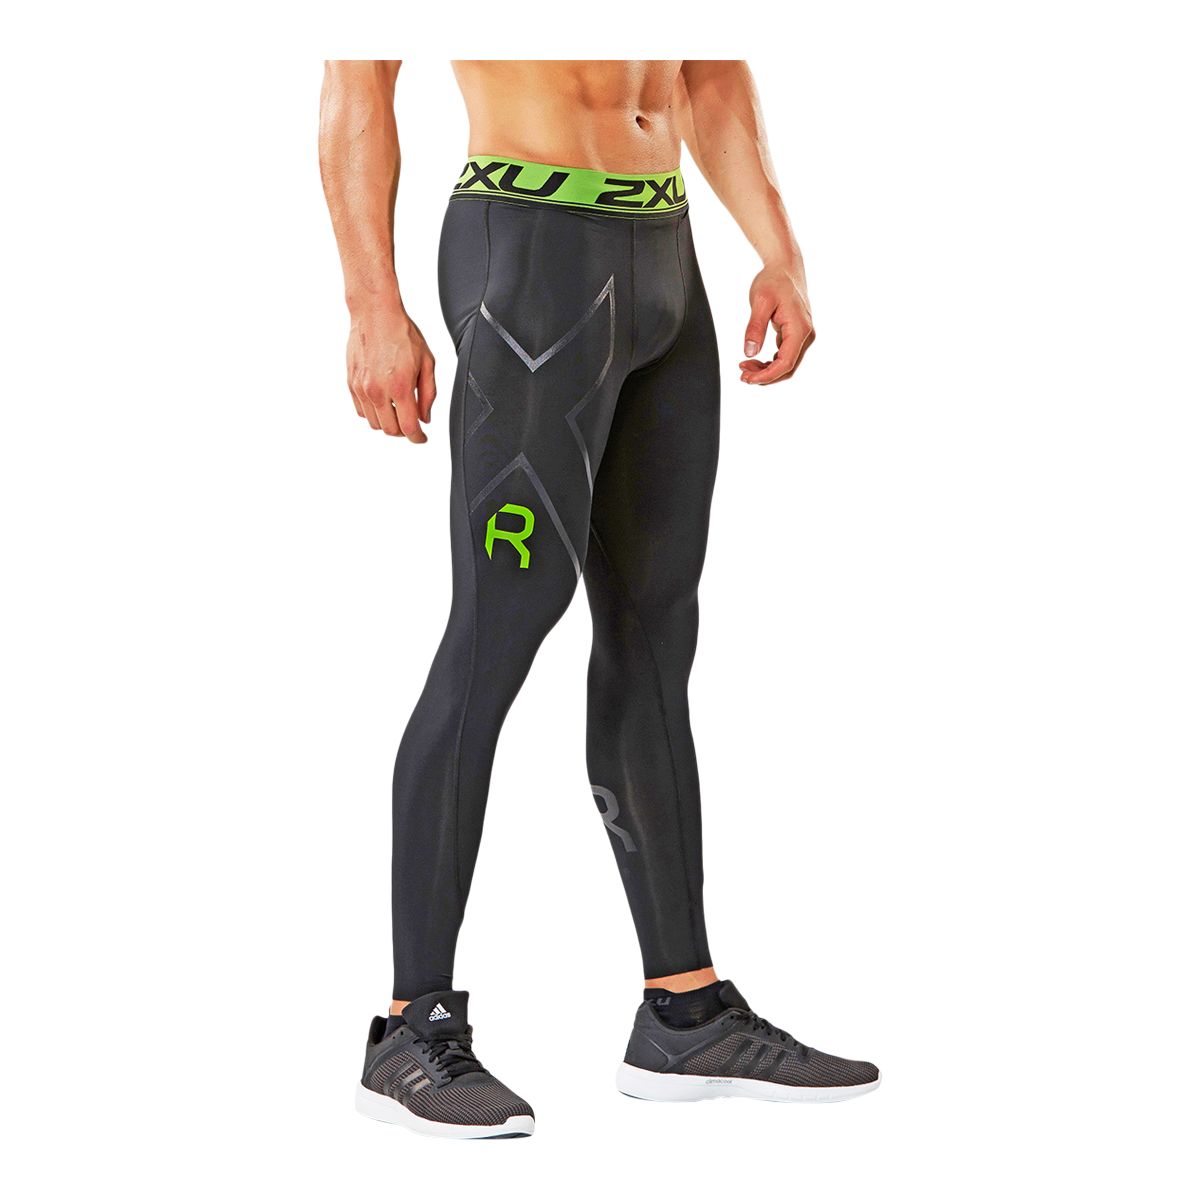 2XU Men's Power Recovery Compression Tights - 2024 XL BRAND NEW WITH TAGS